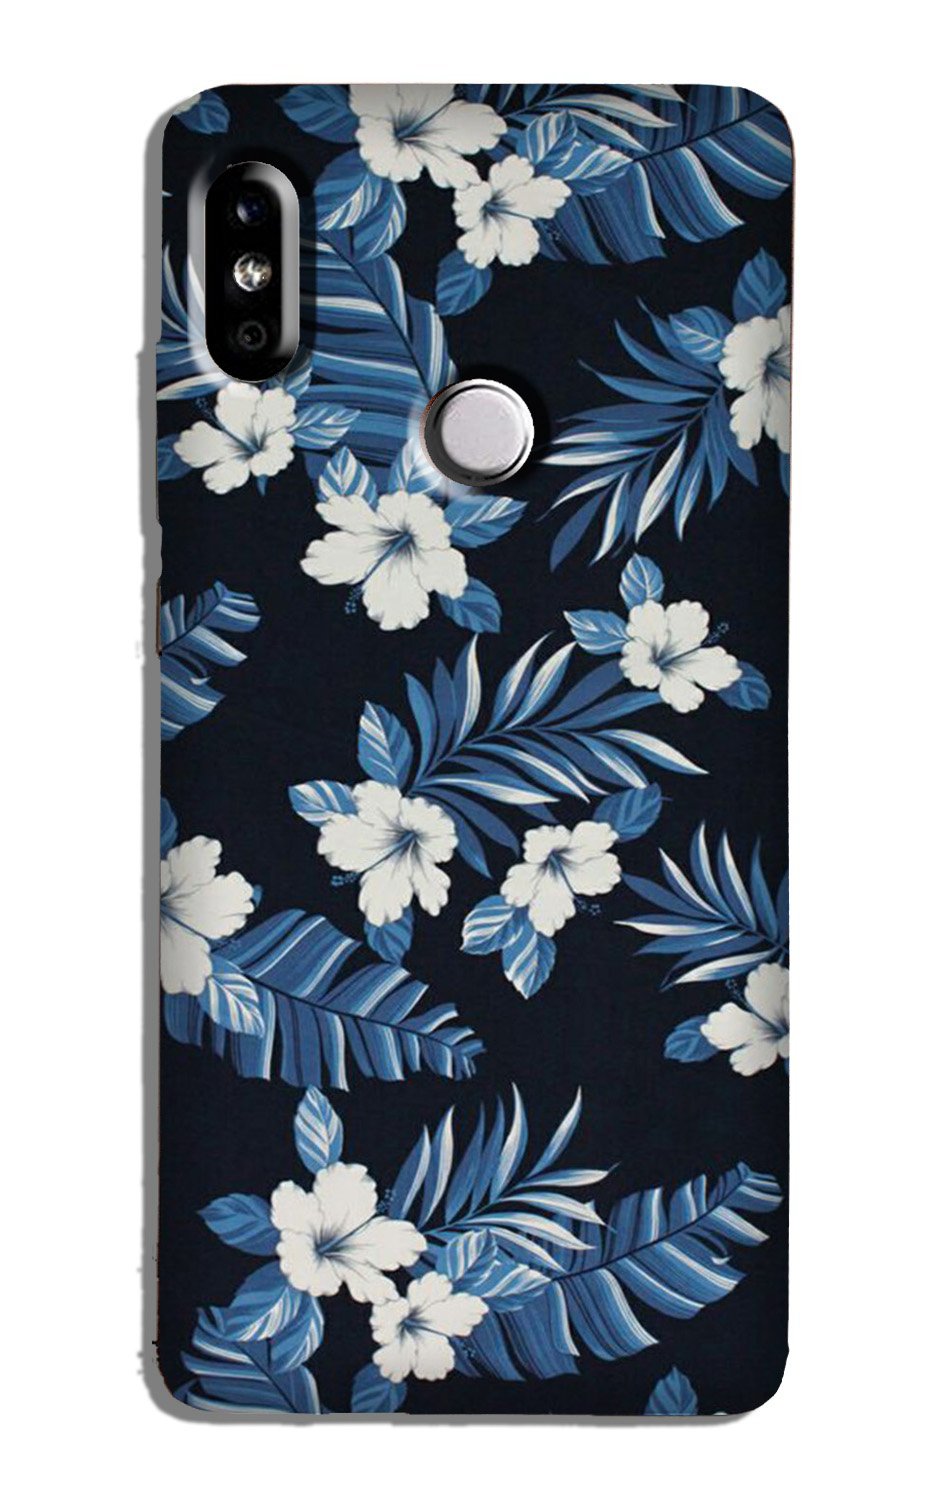 White flowers Blue Background2 Case for Redmi Note 5 Pro